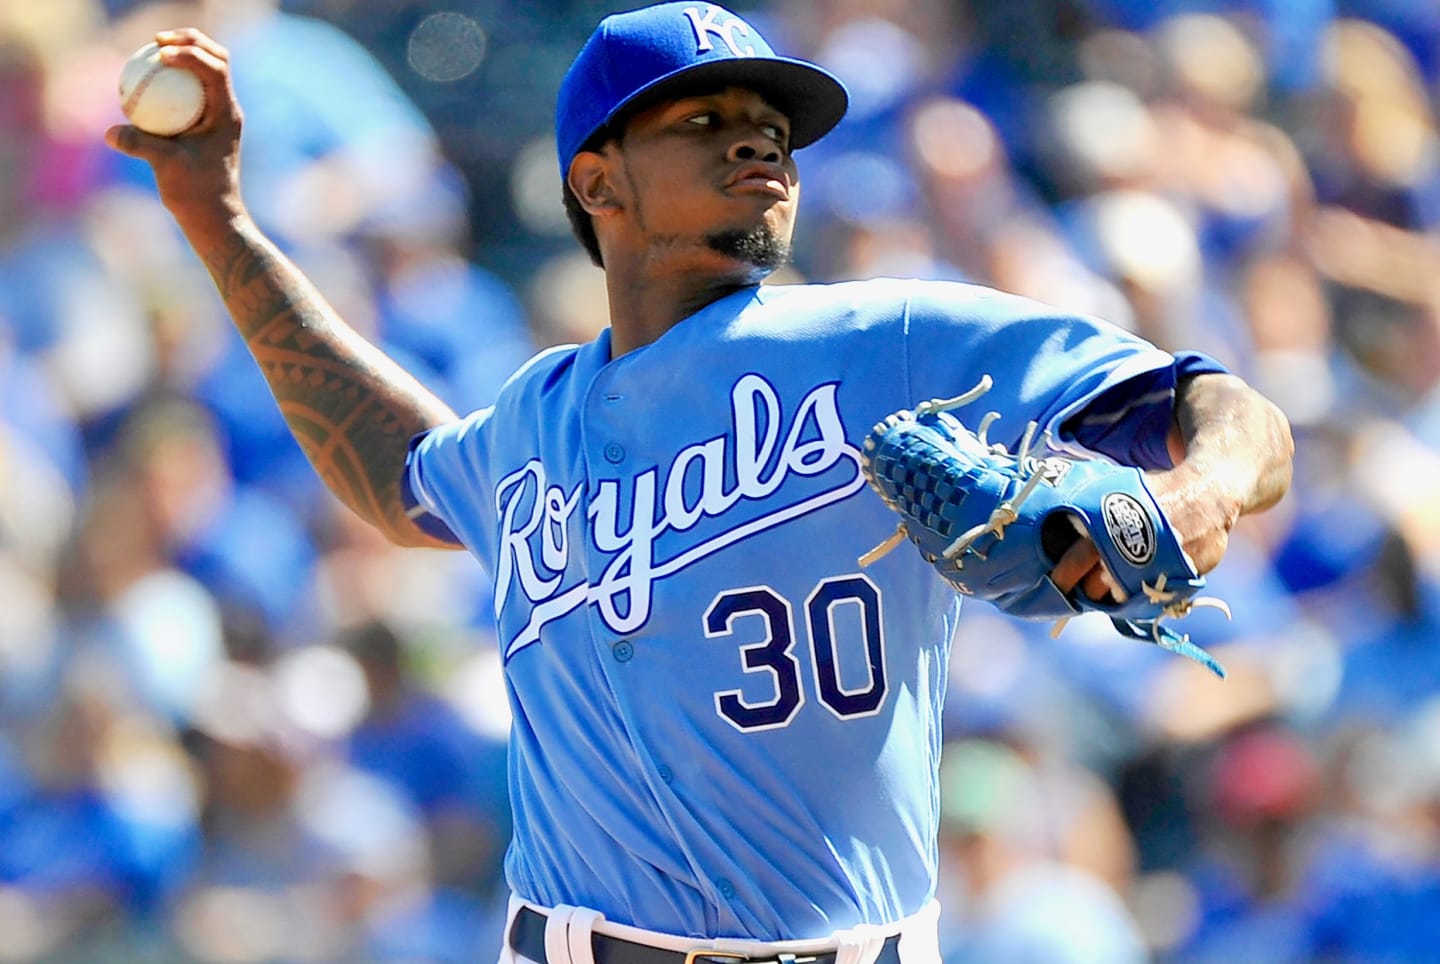 New report says Yordano Ventura died on impact, his family no